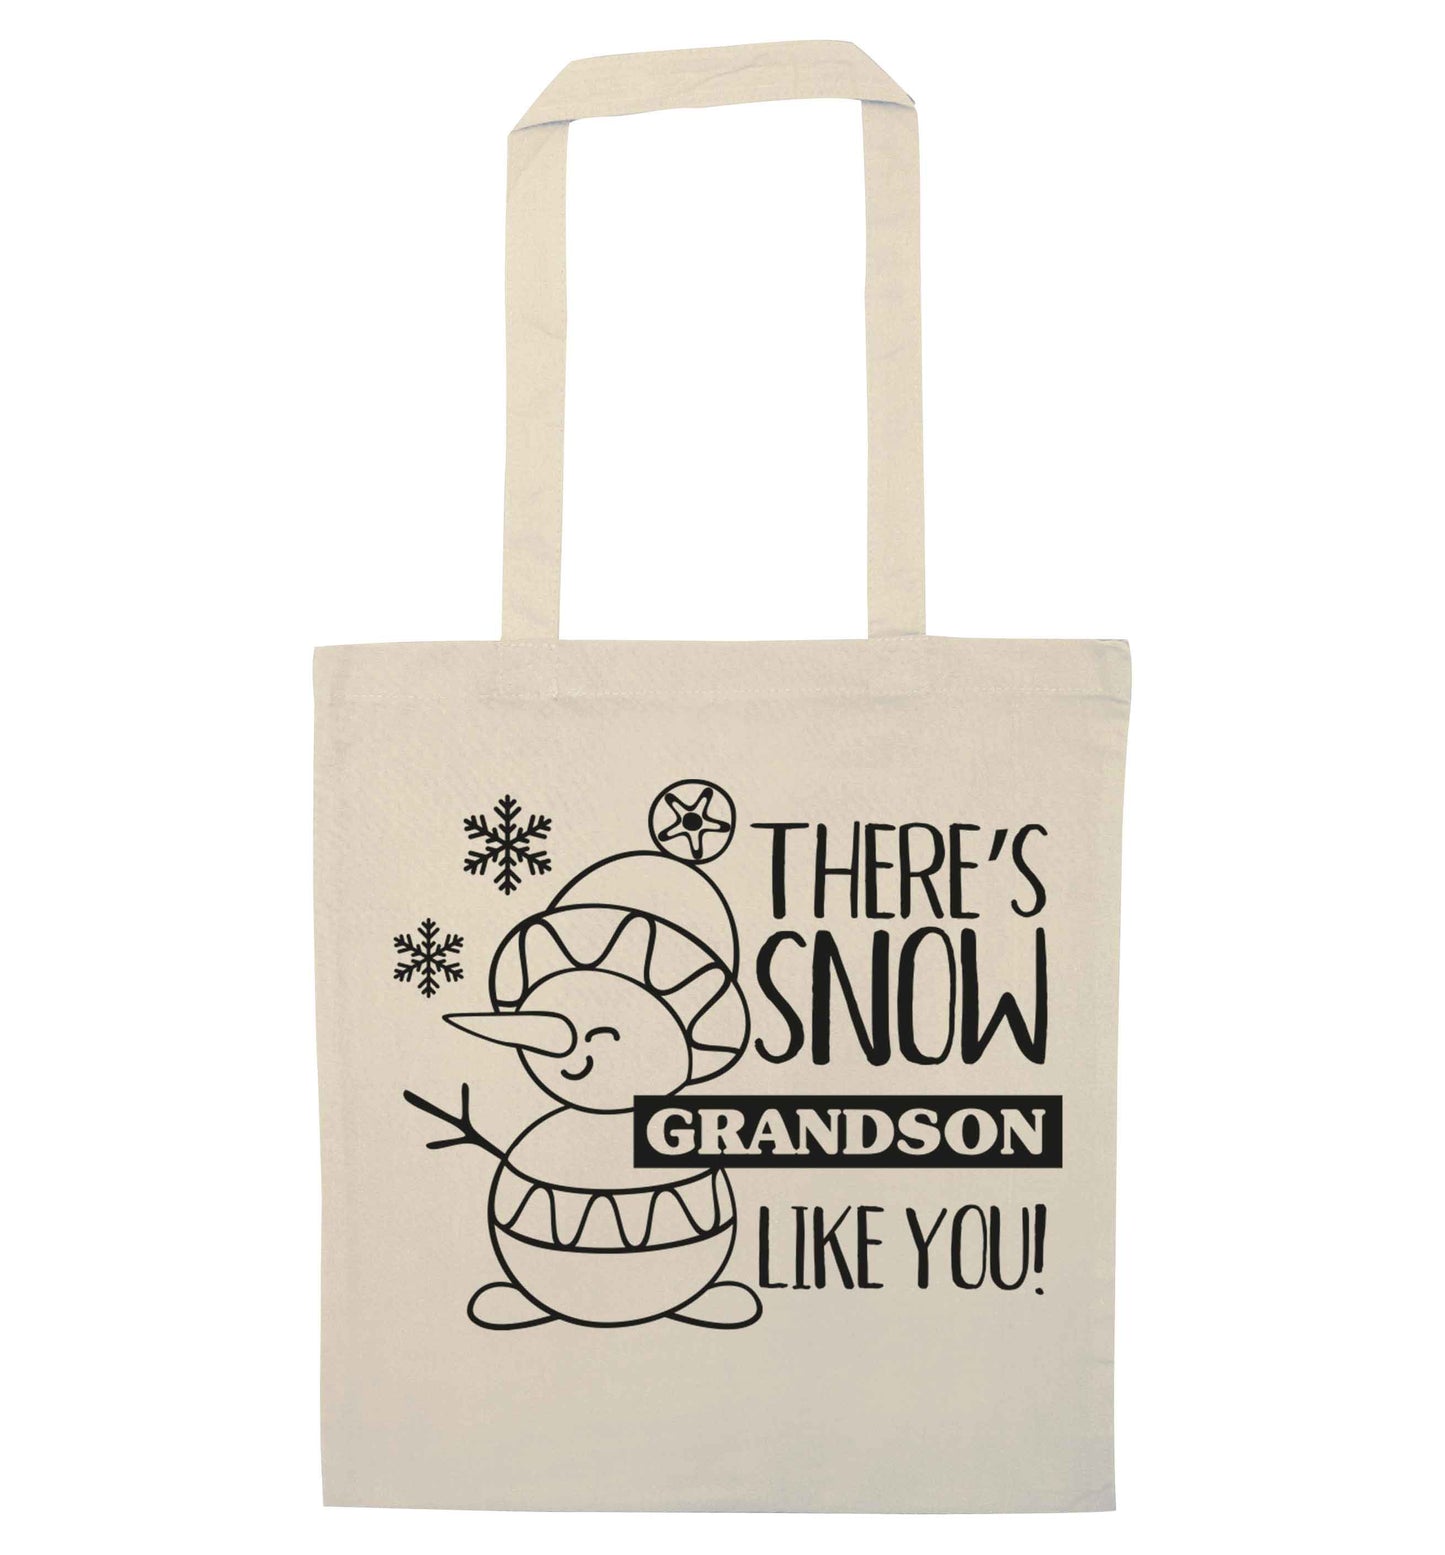 There's snow grandson like you natural tote bag